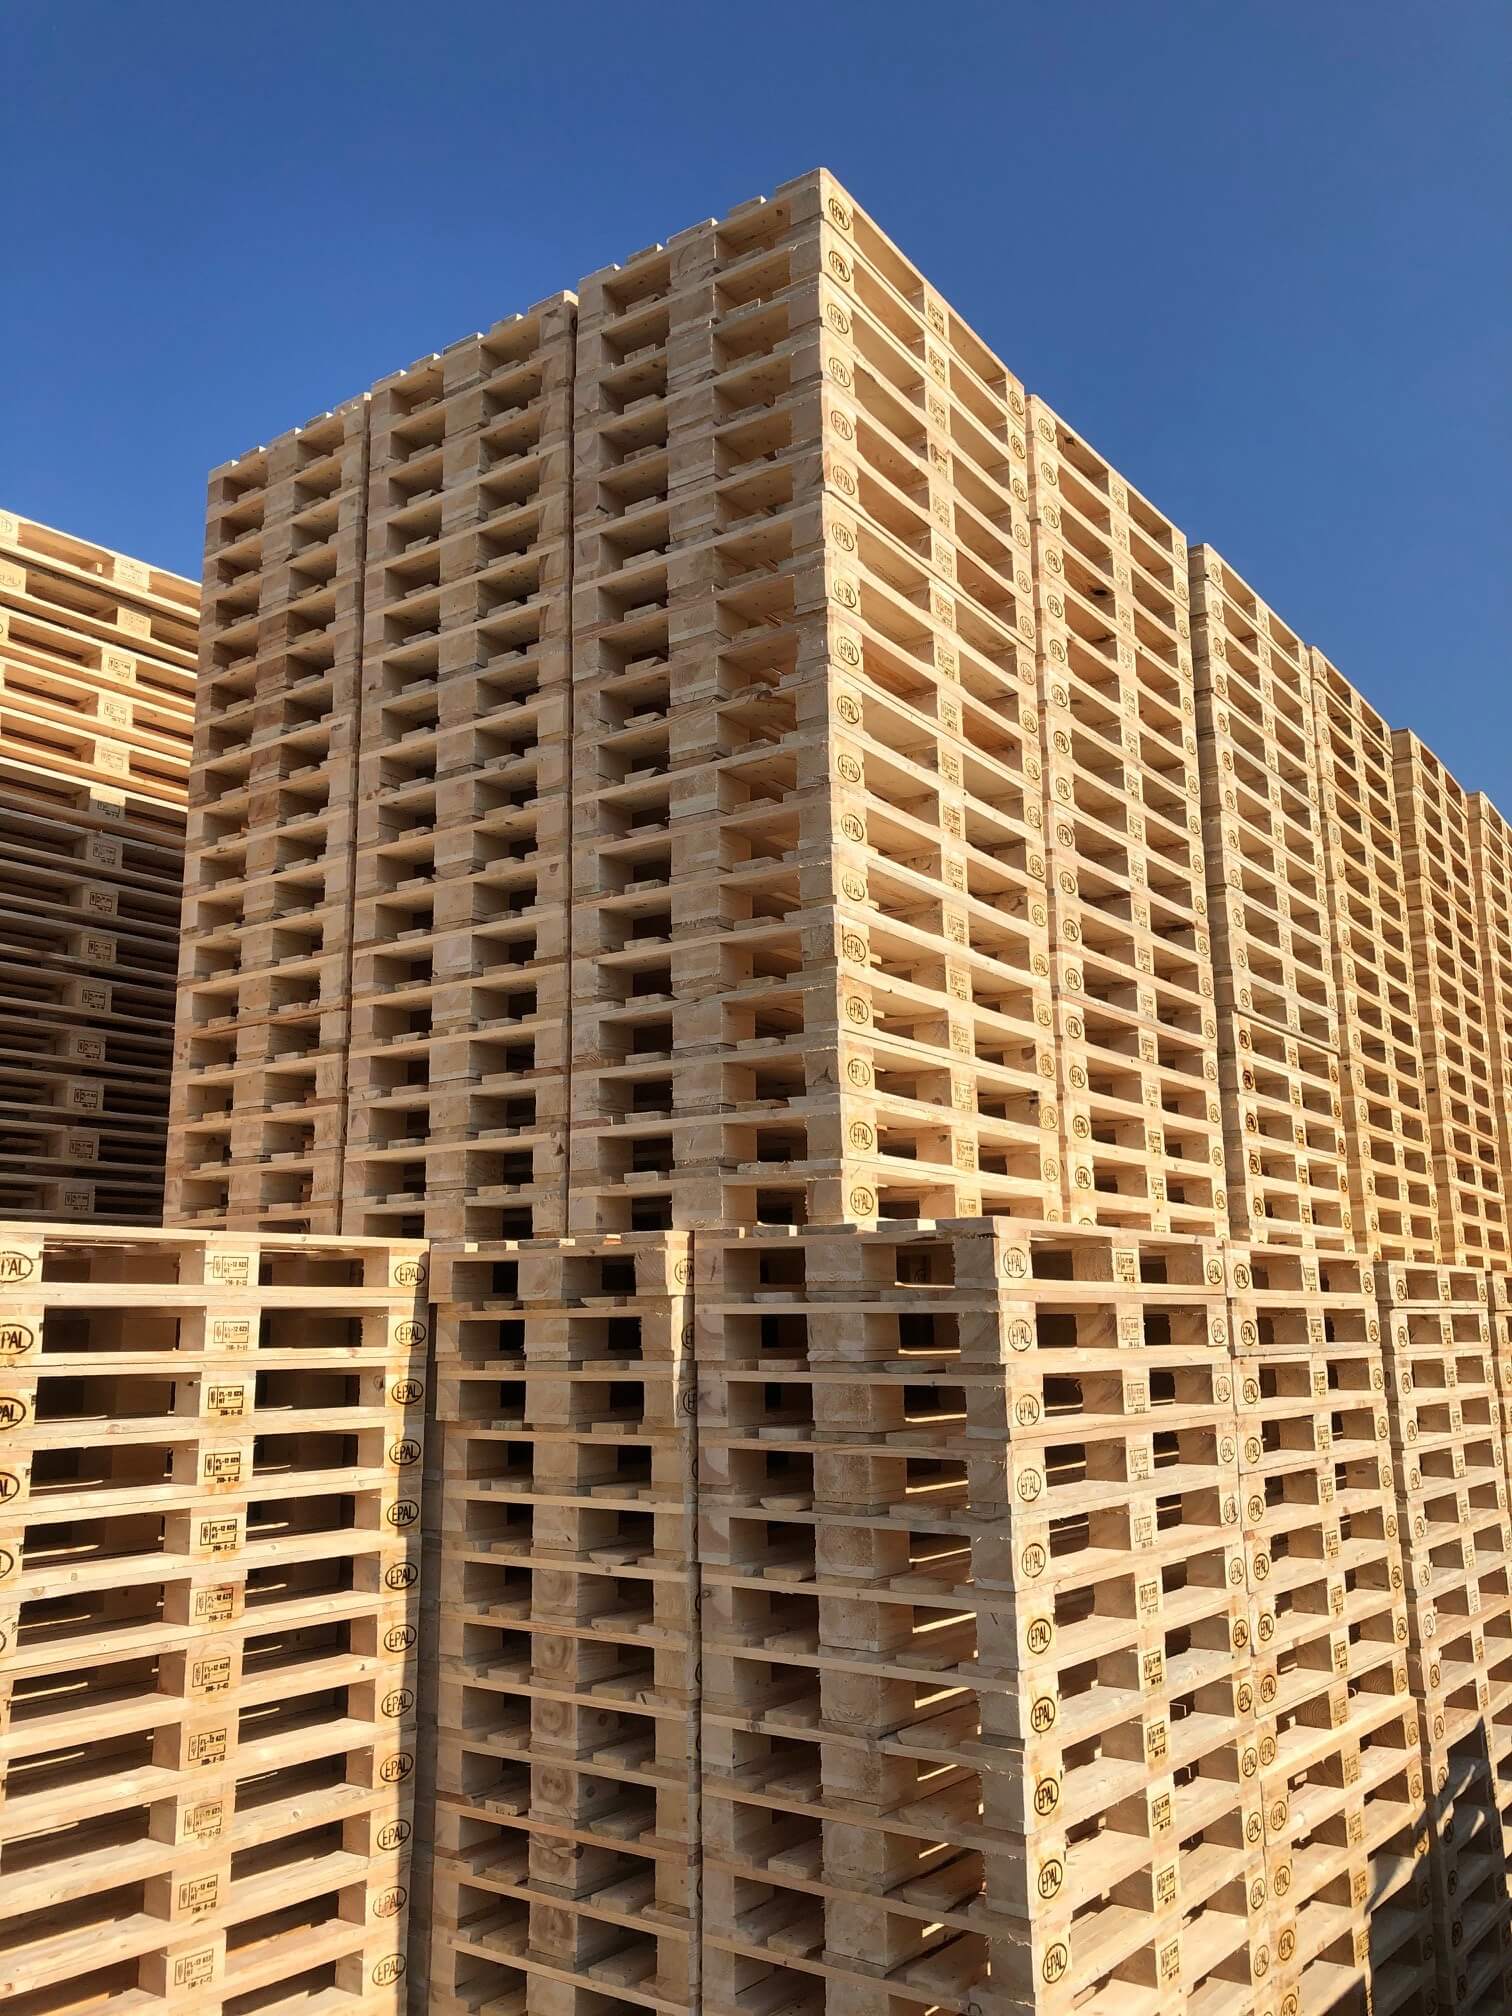 Types of pallets we produce